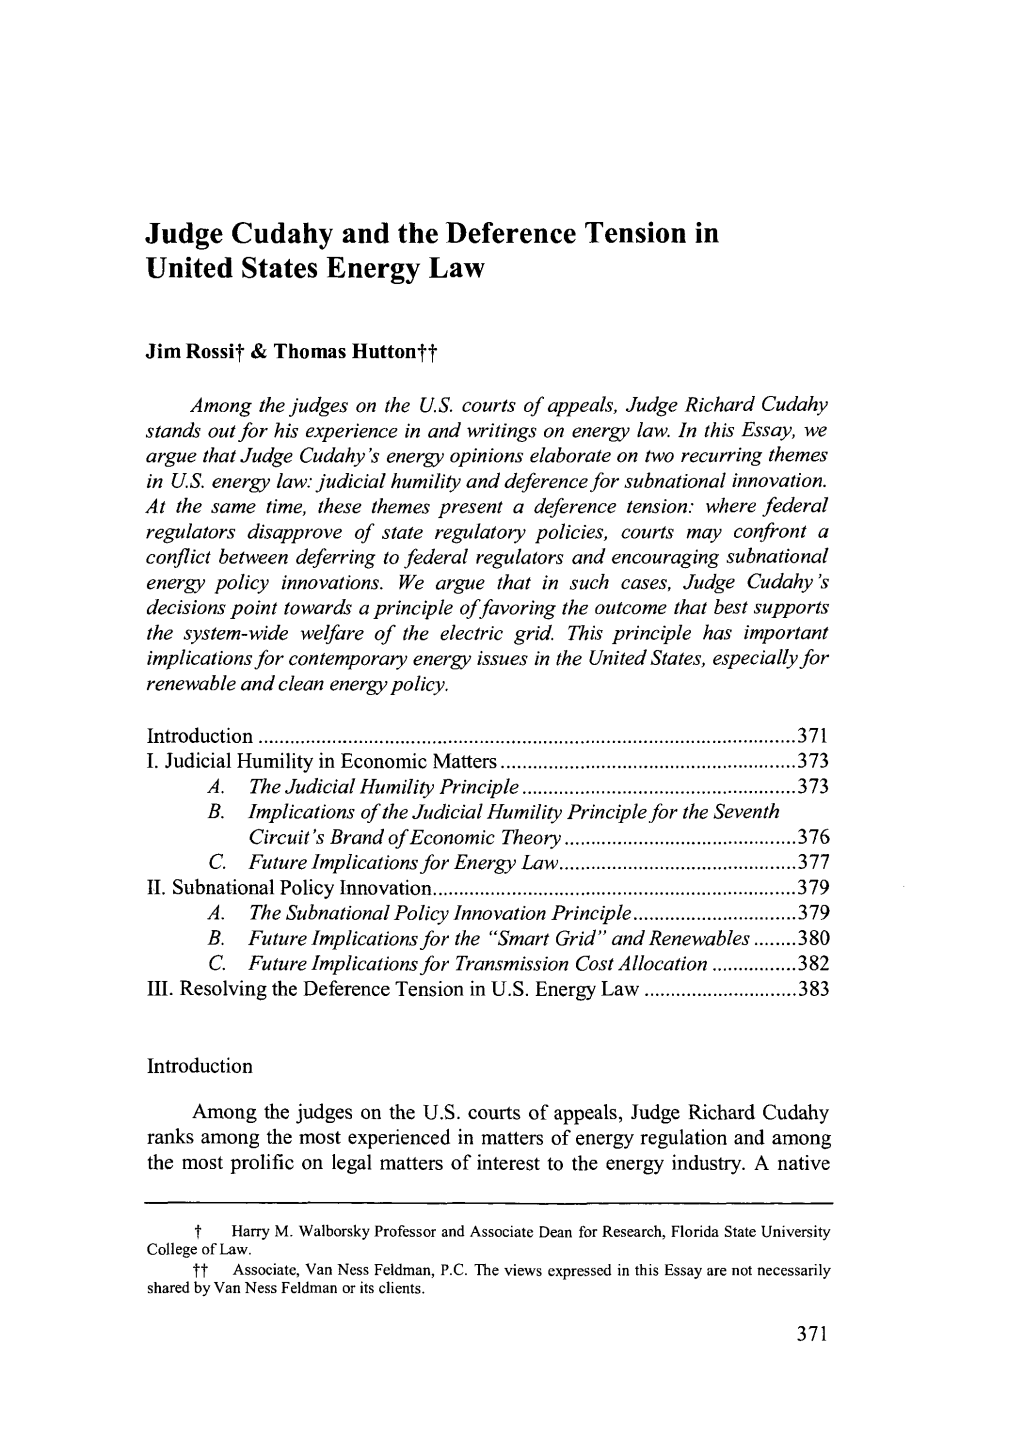 Judge Cudahy and the Deference Tension in United States Energy Law